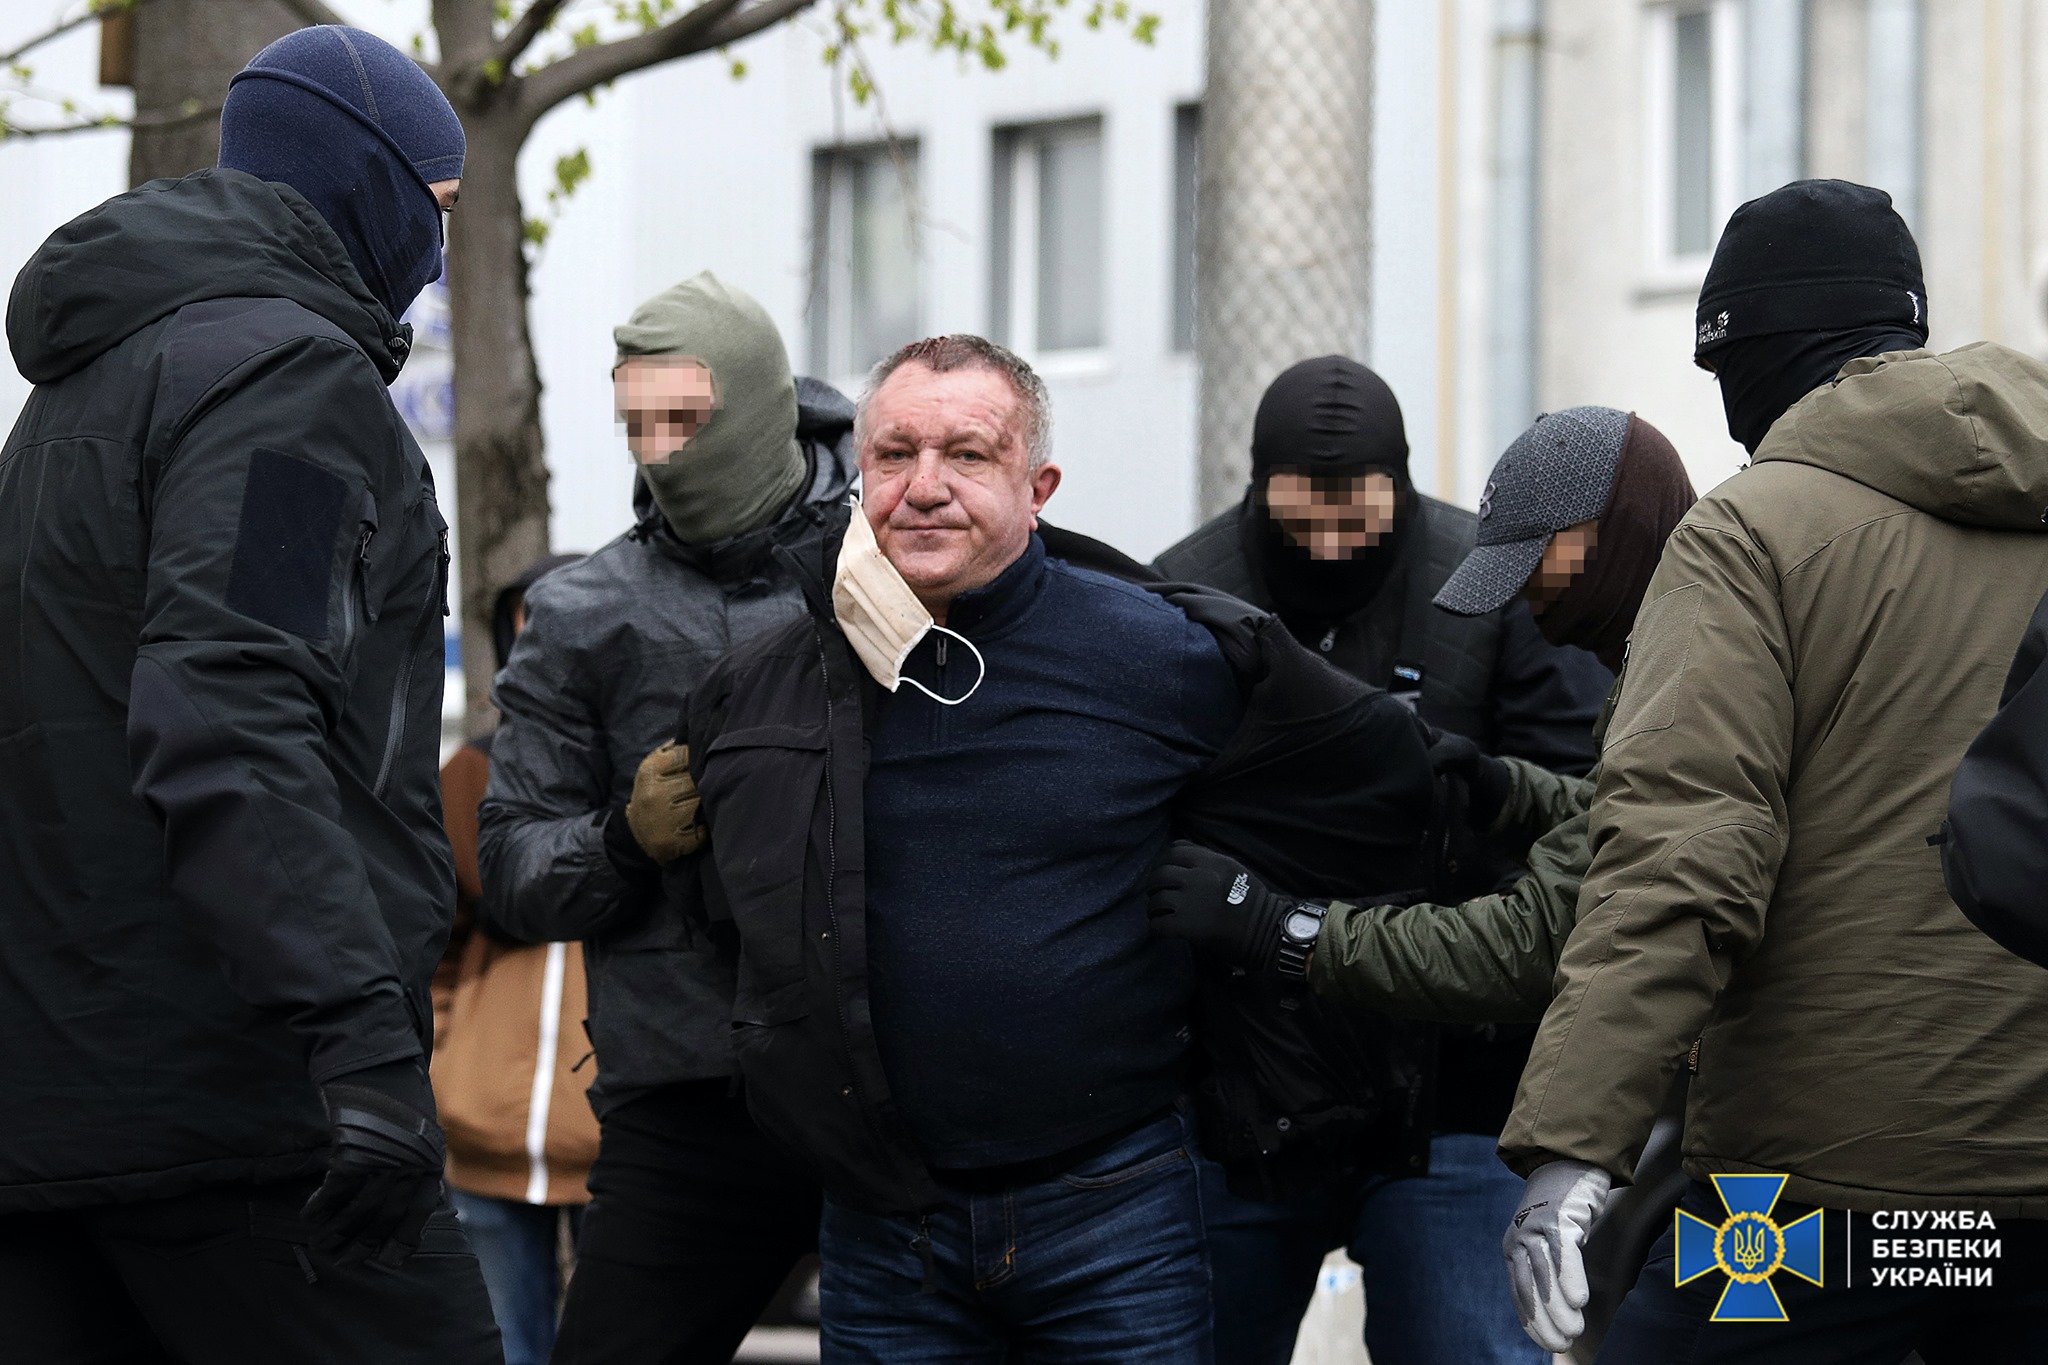 On April 14, the Security Service of Ukraine reported it had arrested a “mole” within its ranks—Major General Valerii Shaitanov, who served as the chief of the service’s Center for Special Operations “A.” He was detained under suspicion of state treason and for allegedly carrying out terrorist attacks. (Photo: ssu.gov.ua)